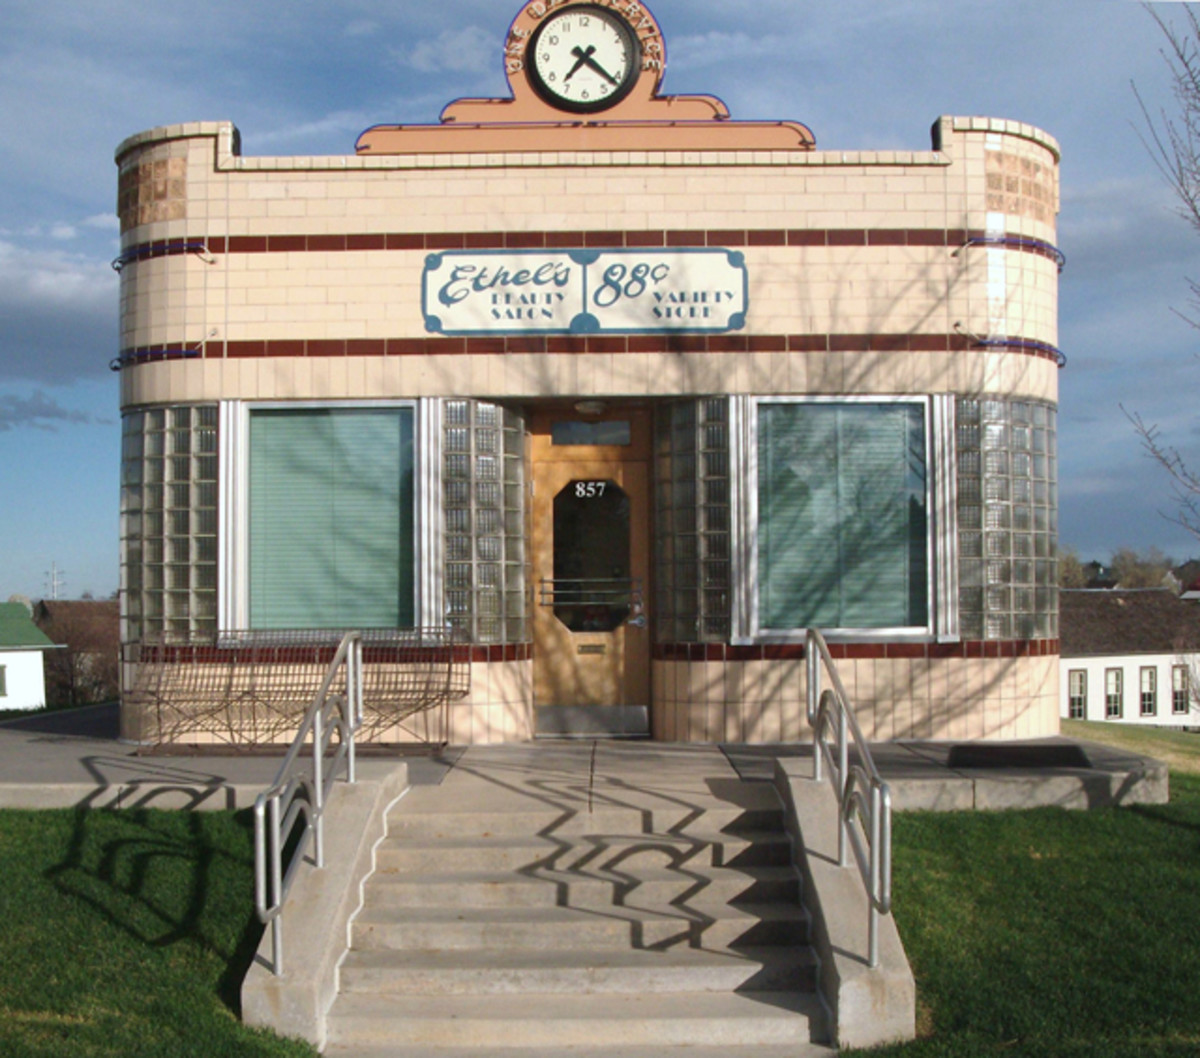 Ethel’s beauty parlor blends different architectural style.